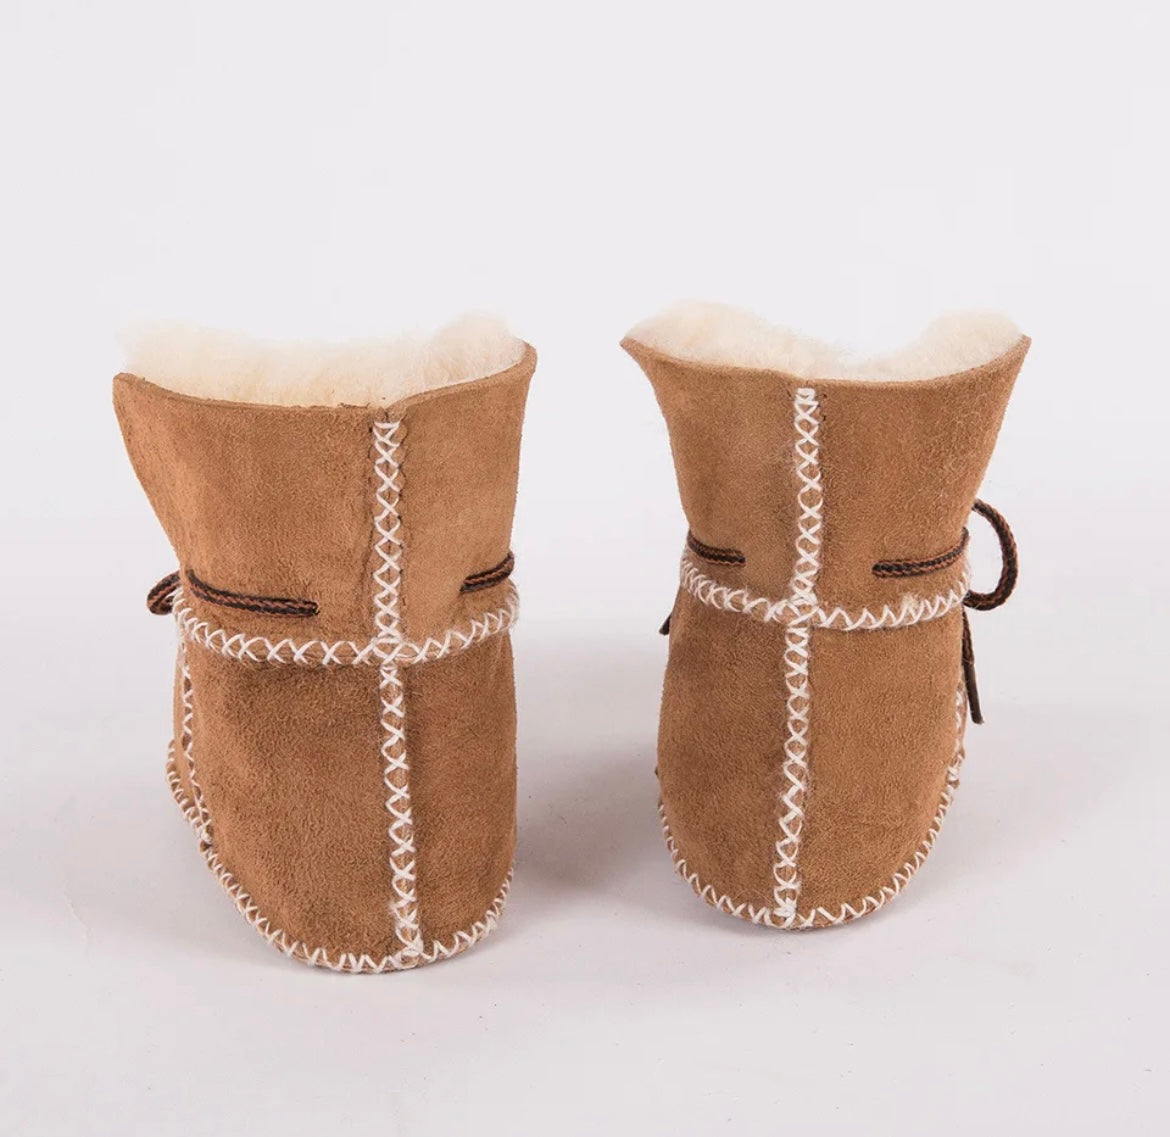 SUSY Shearling Shoes